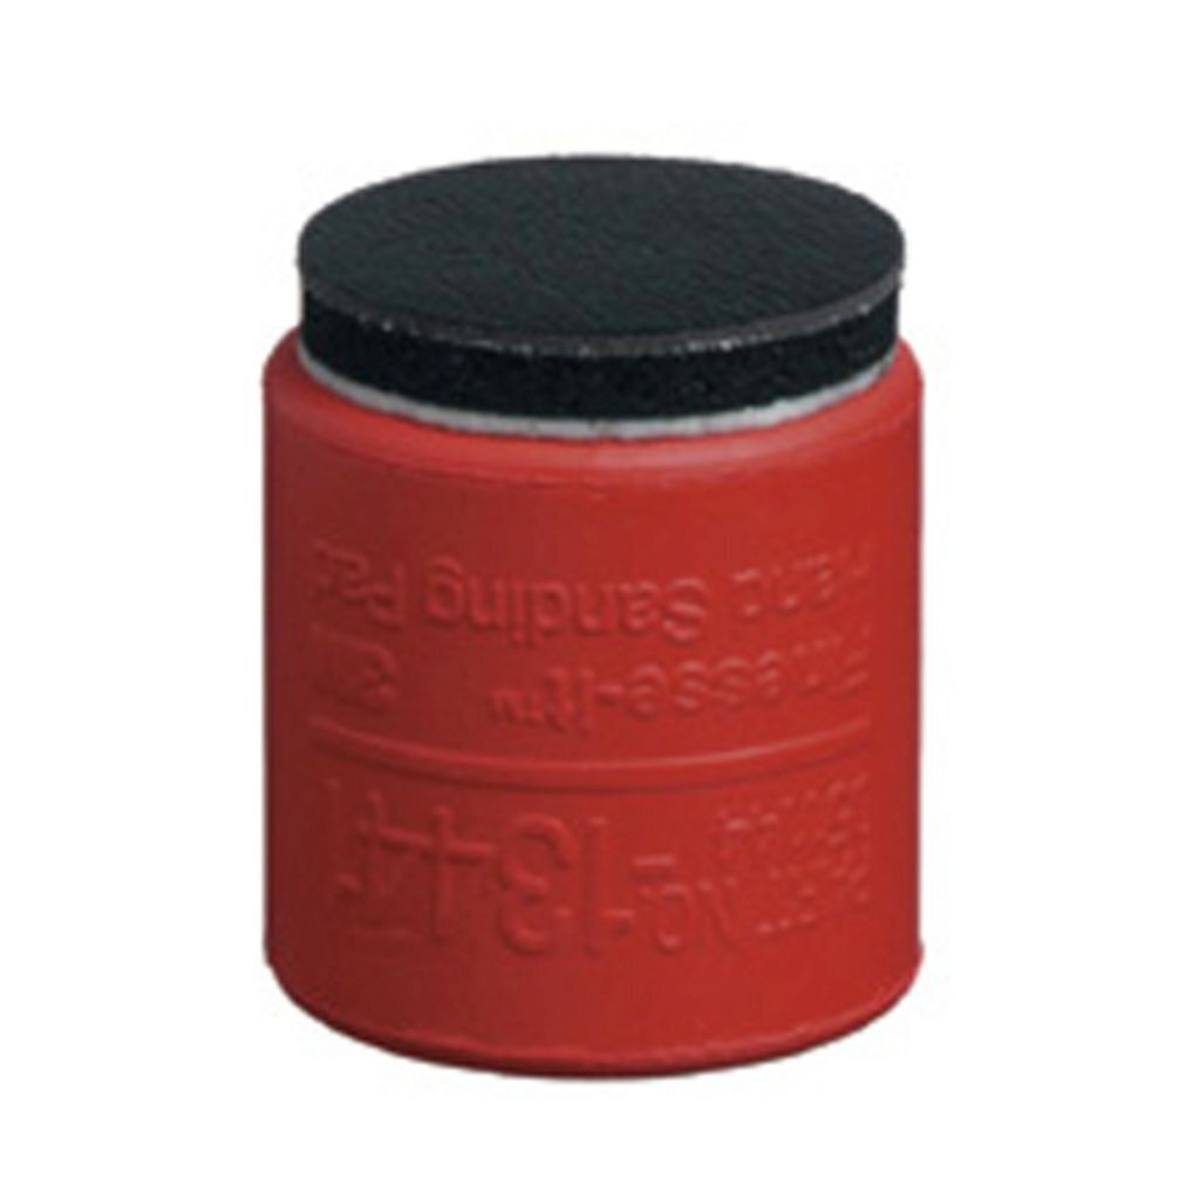 3M Finesse-it hand block, red, 32 mm, soft #E50199